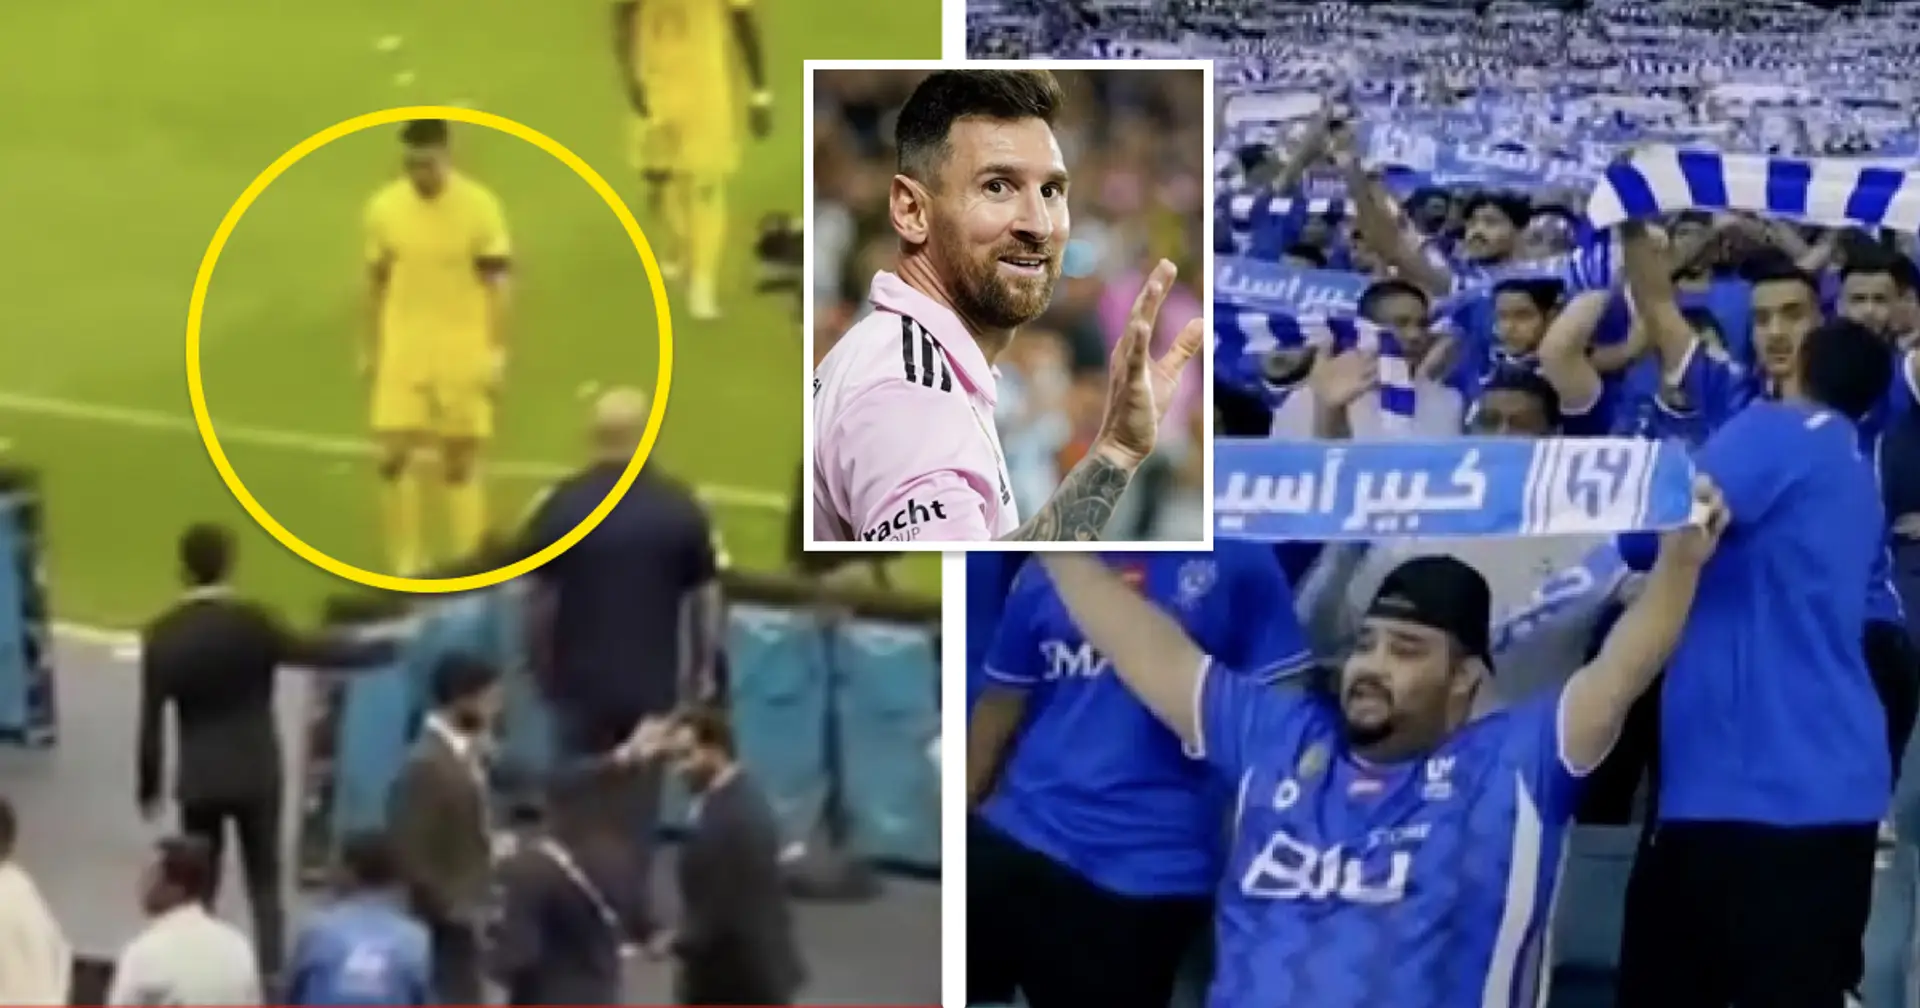 Fans chant Messi's name during Saudi Clasico – Ronaldo's reaction spotted